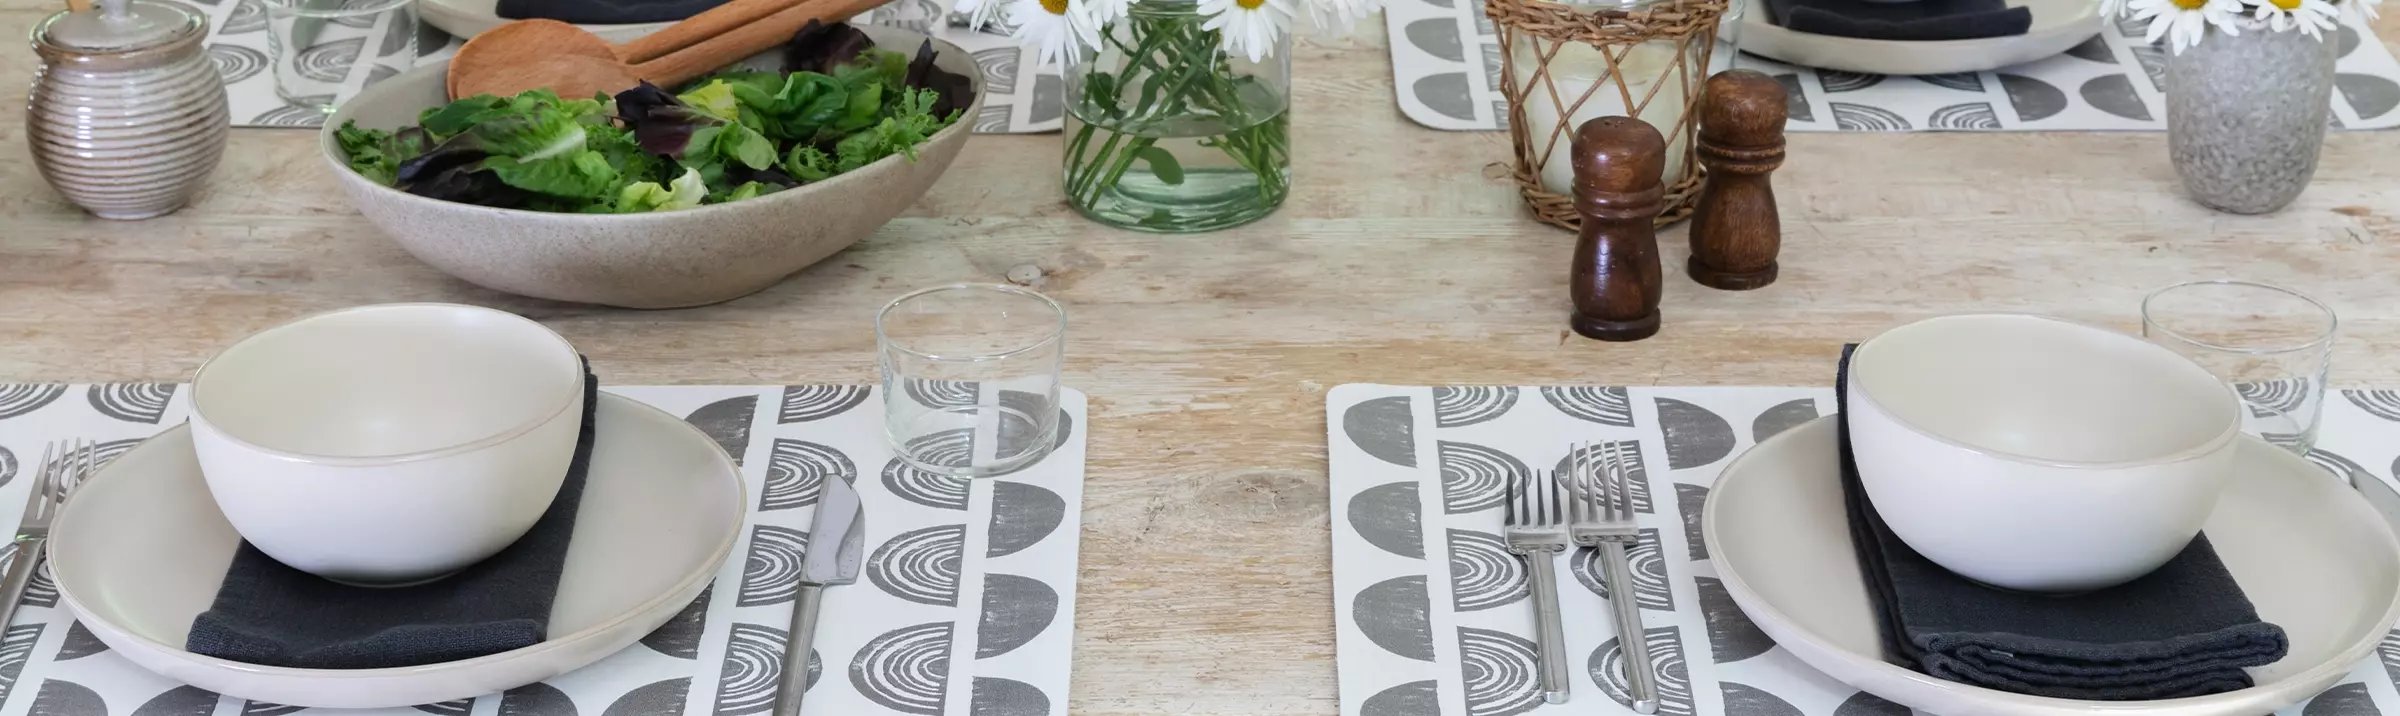 Ada Char black and white place mat shown on a table with place setting